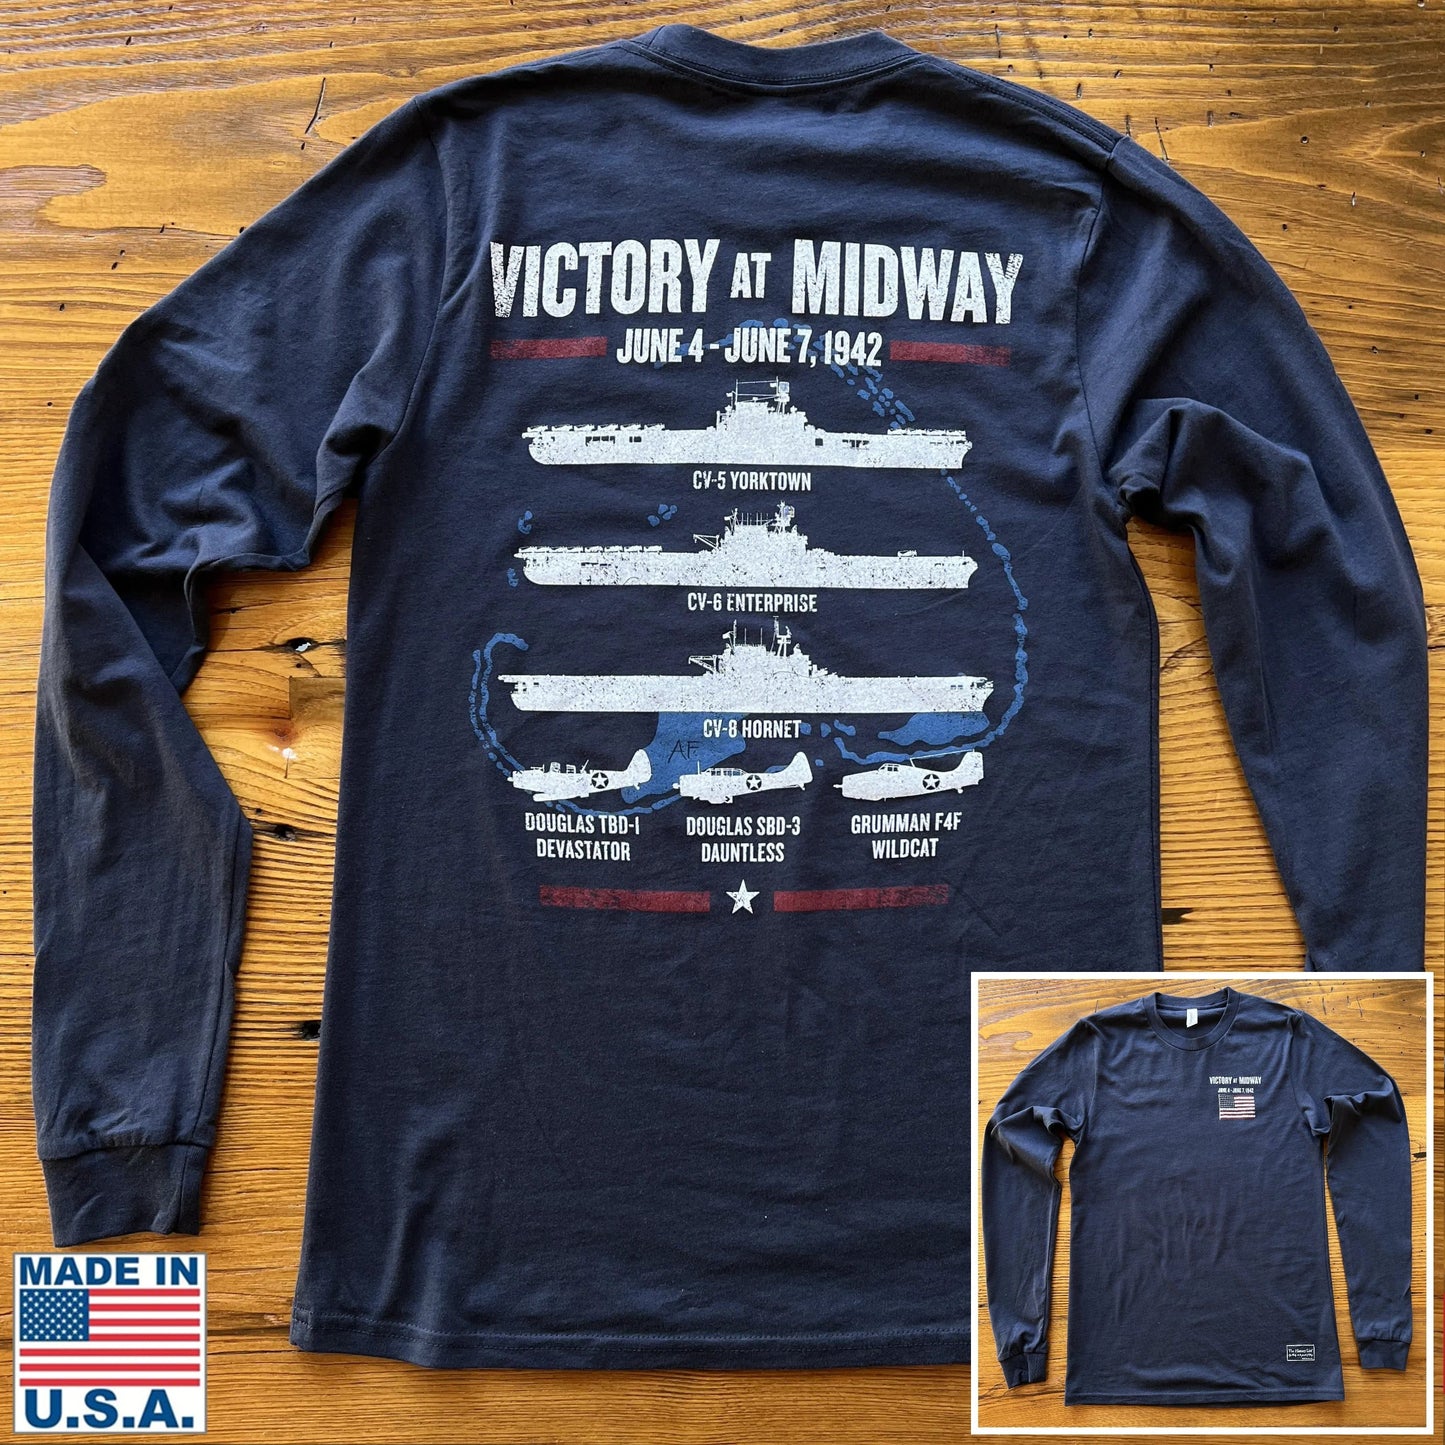 "Victory at Midway" made in America Long-sleeved Shirt